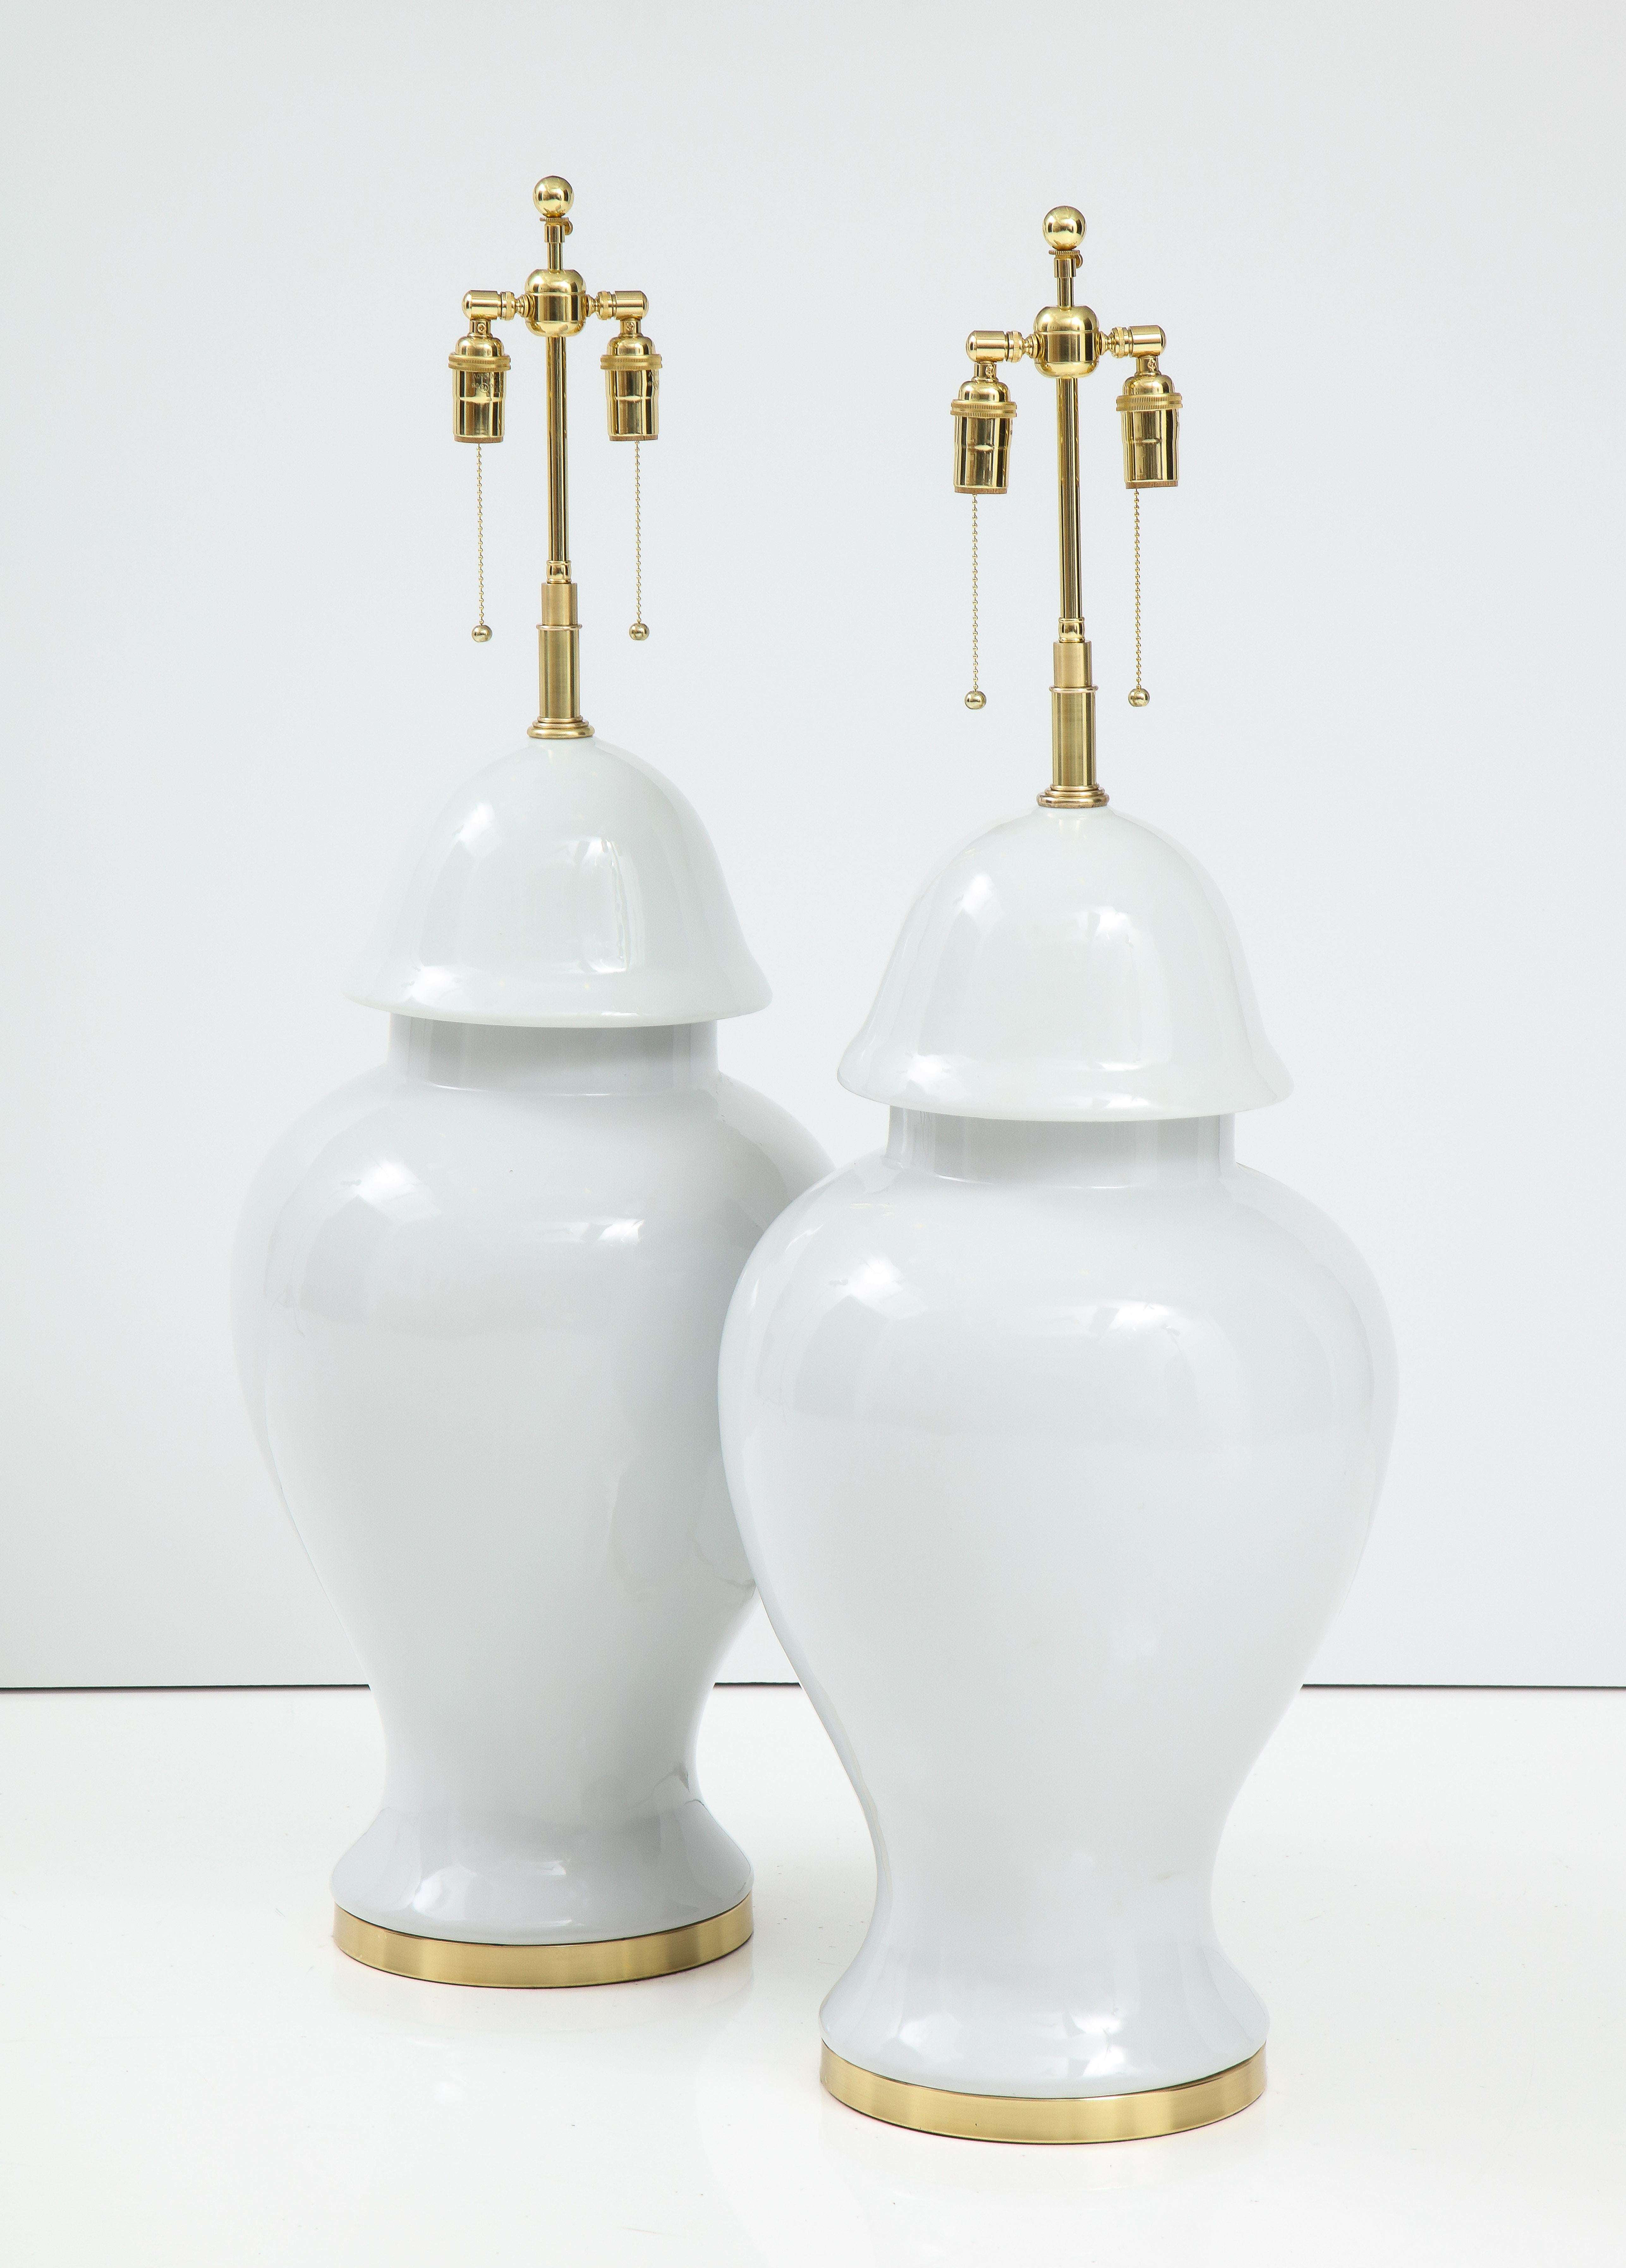 Monumental pair of blanc de chine ginger jar lamps.
The lamp bodies sit on polished brass bases and they have been
Newly rewired with adjustable polished brass double clusters that take
standard size light bulbs.
The overall height to the finial is